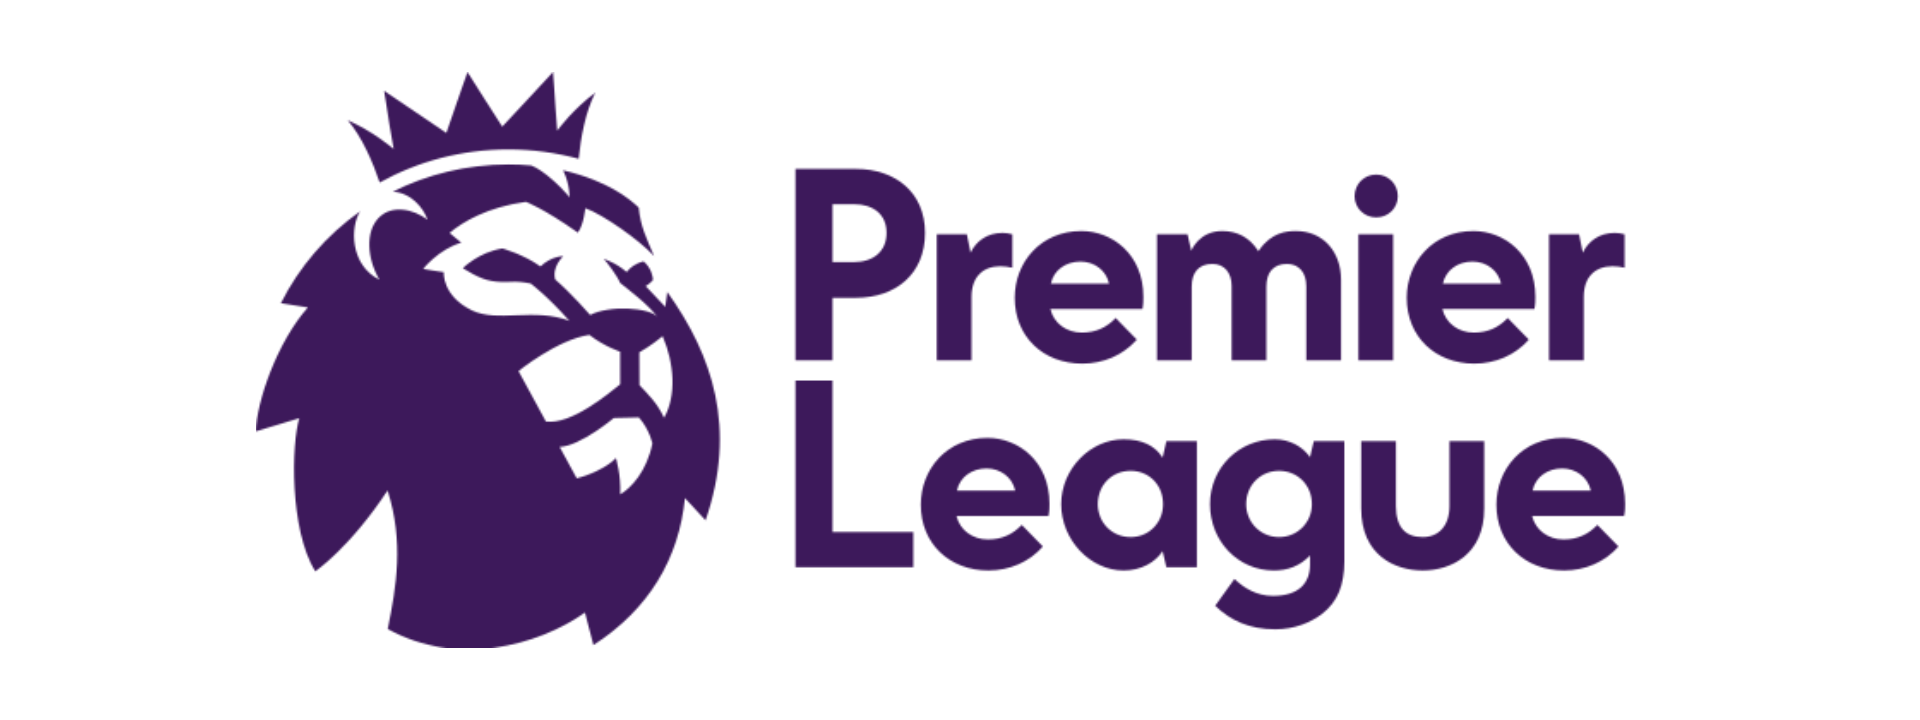 Crypto casinos affected by Premier League gambling sponsorship ban